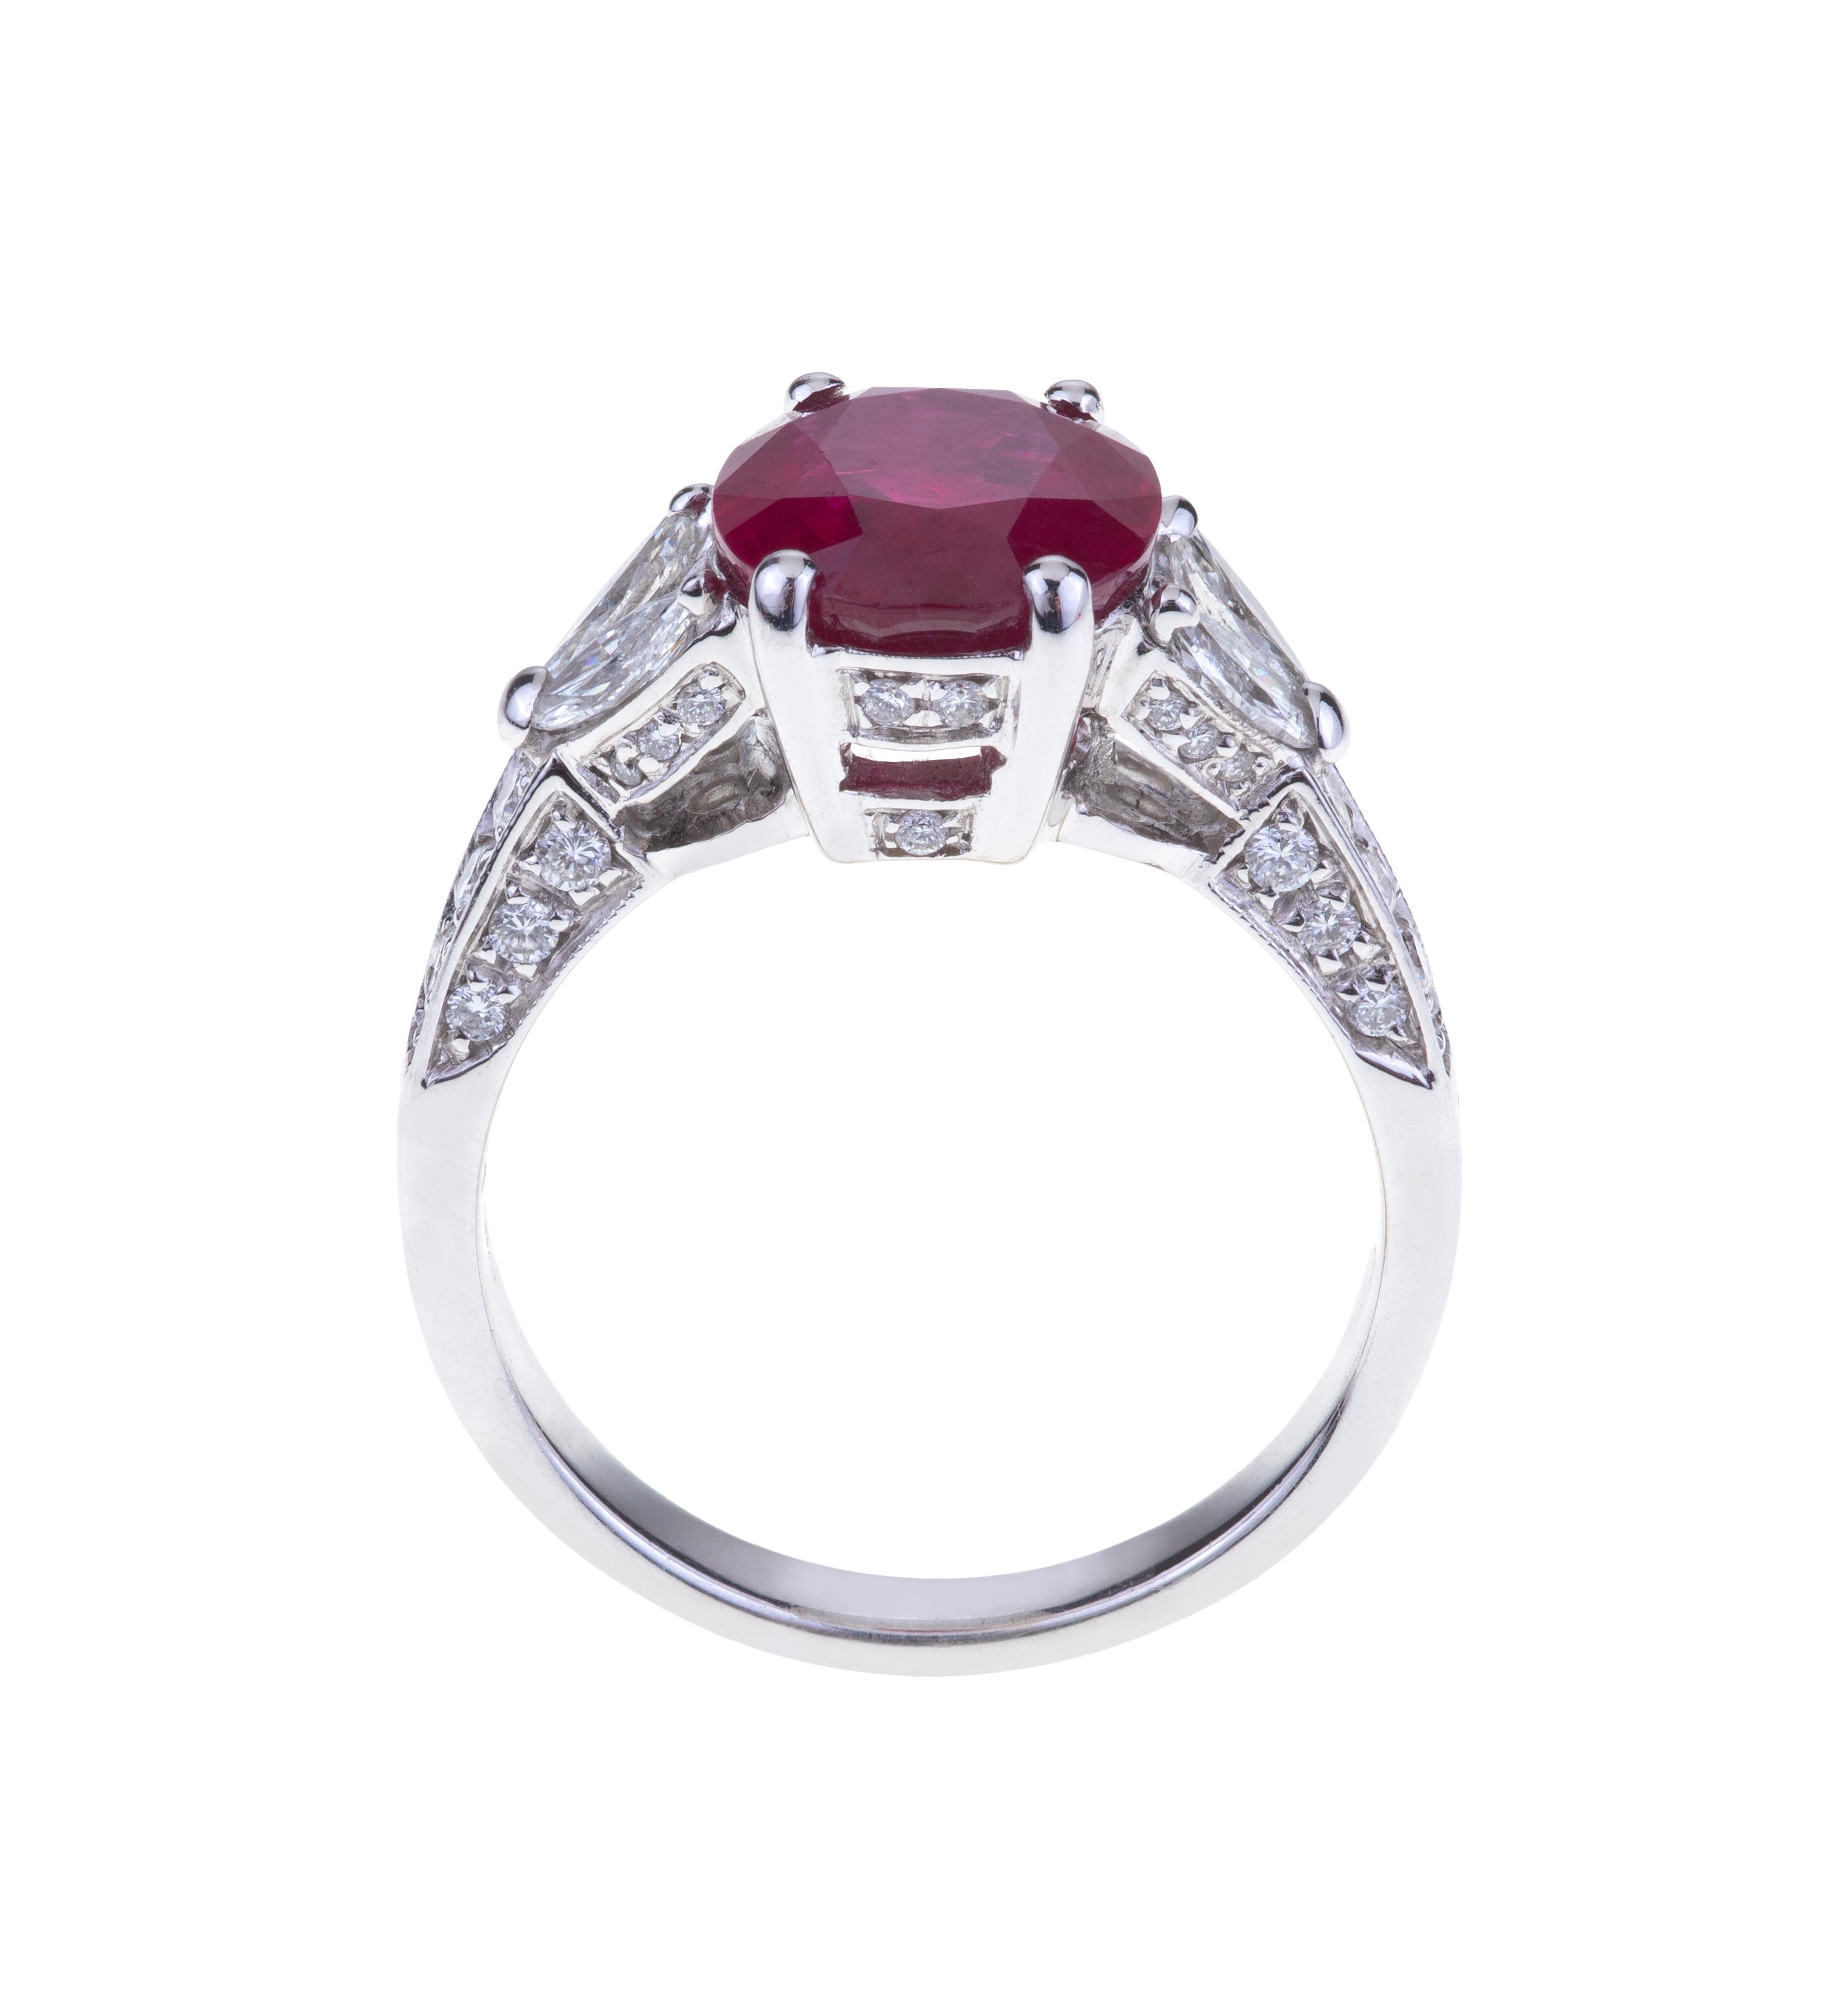 Contemporary Stunning Oval Ruby Ring ct. 4.10 with Diamonds. Unique Stone. For Sale